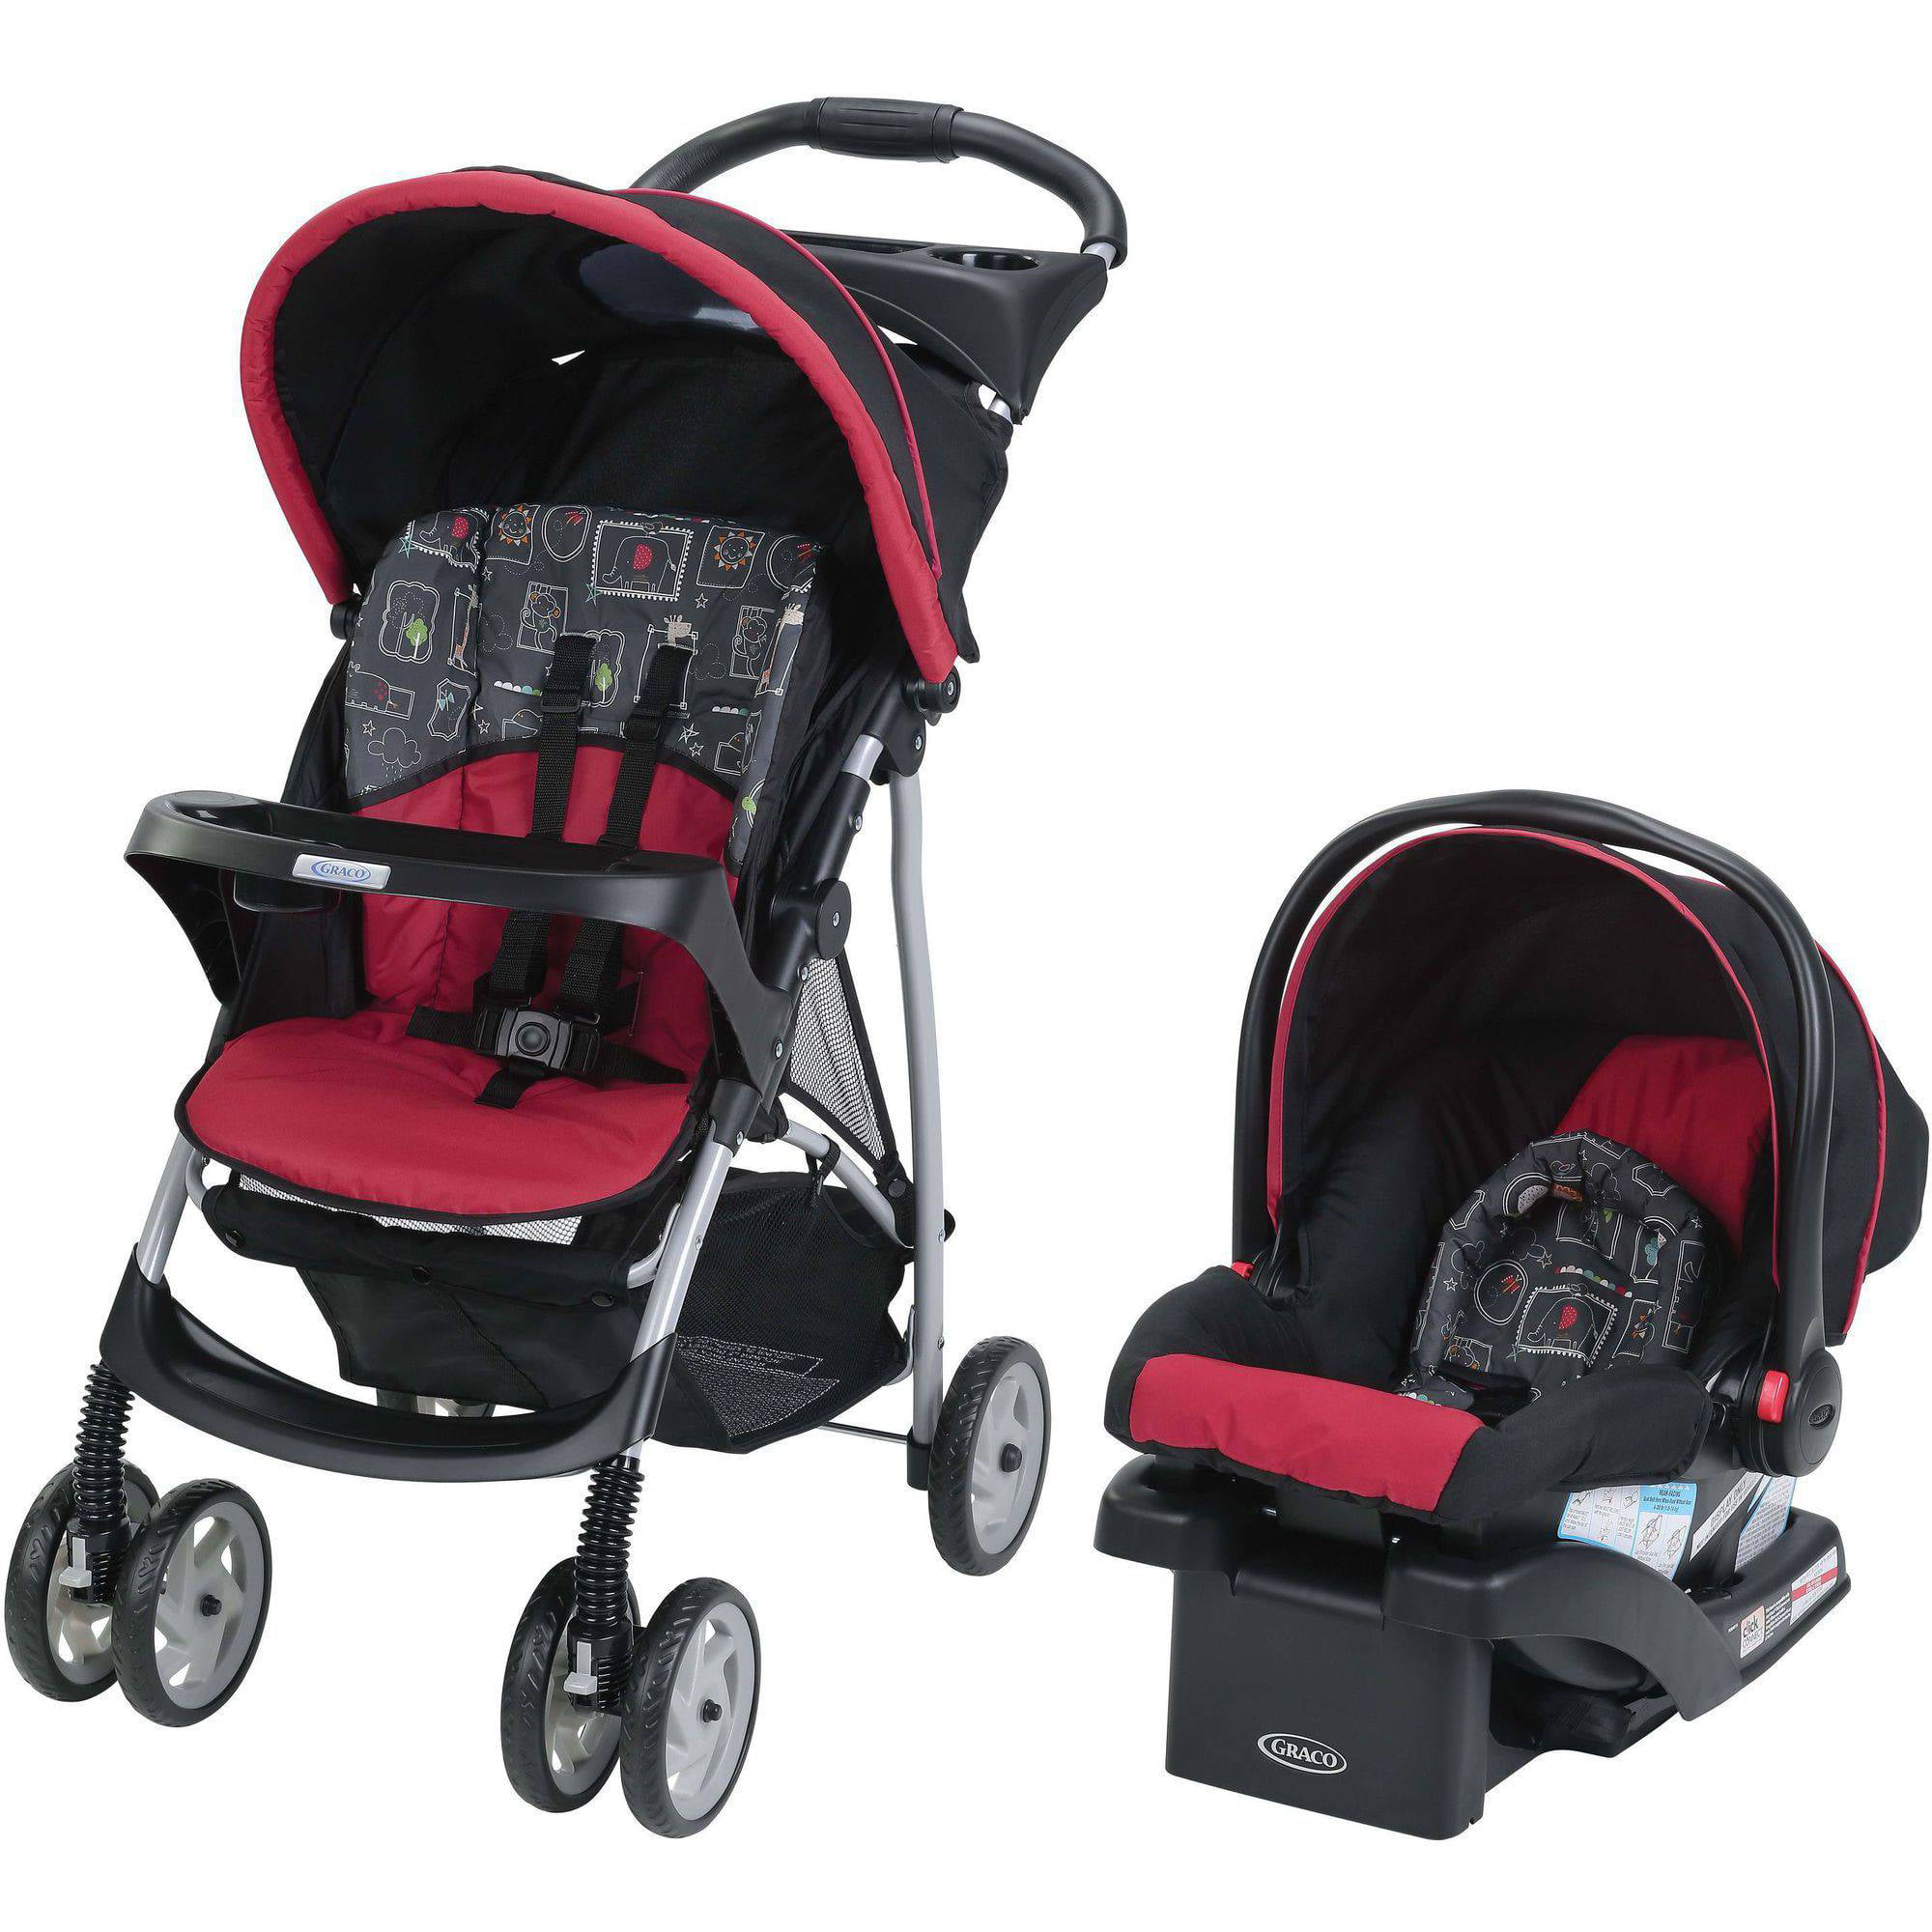 graco travel system with rubber wheels